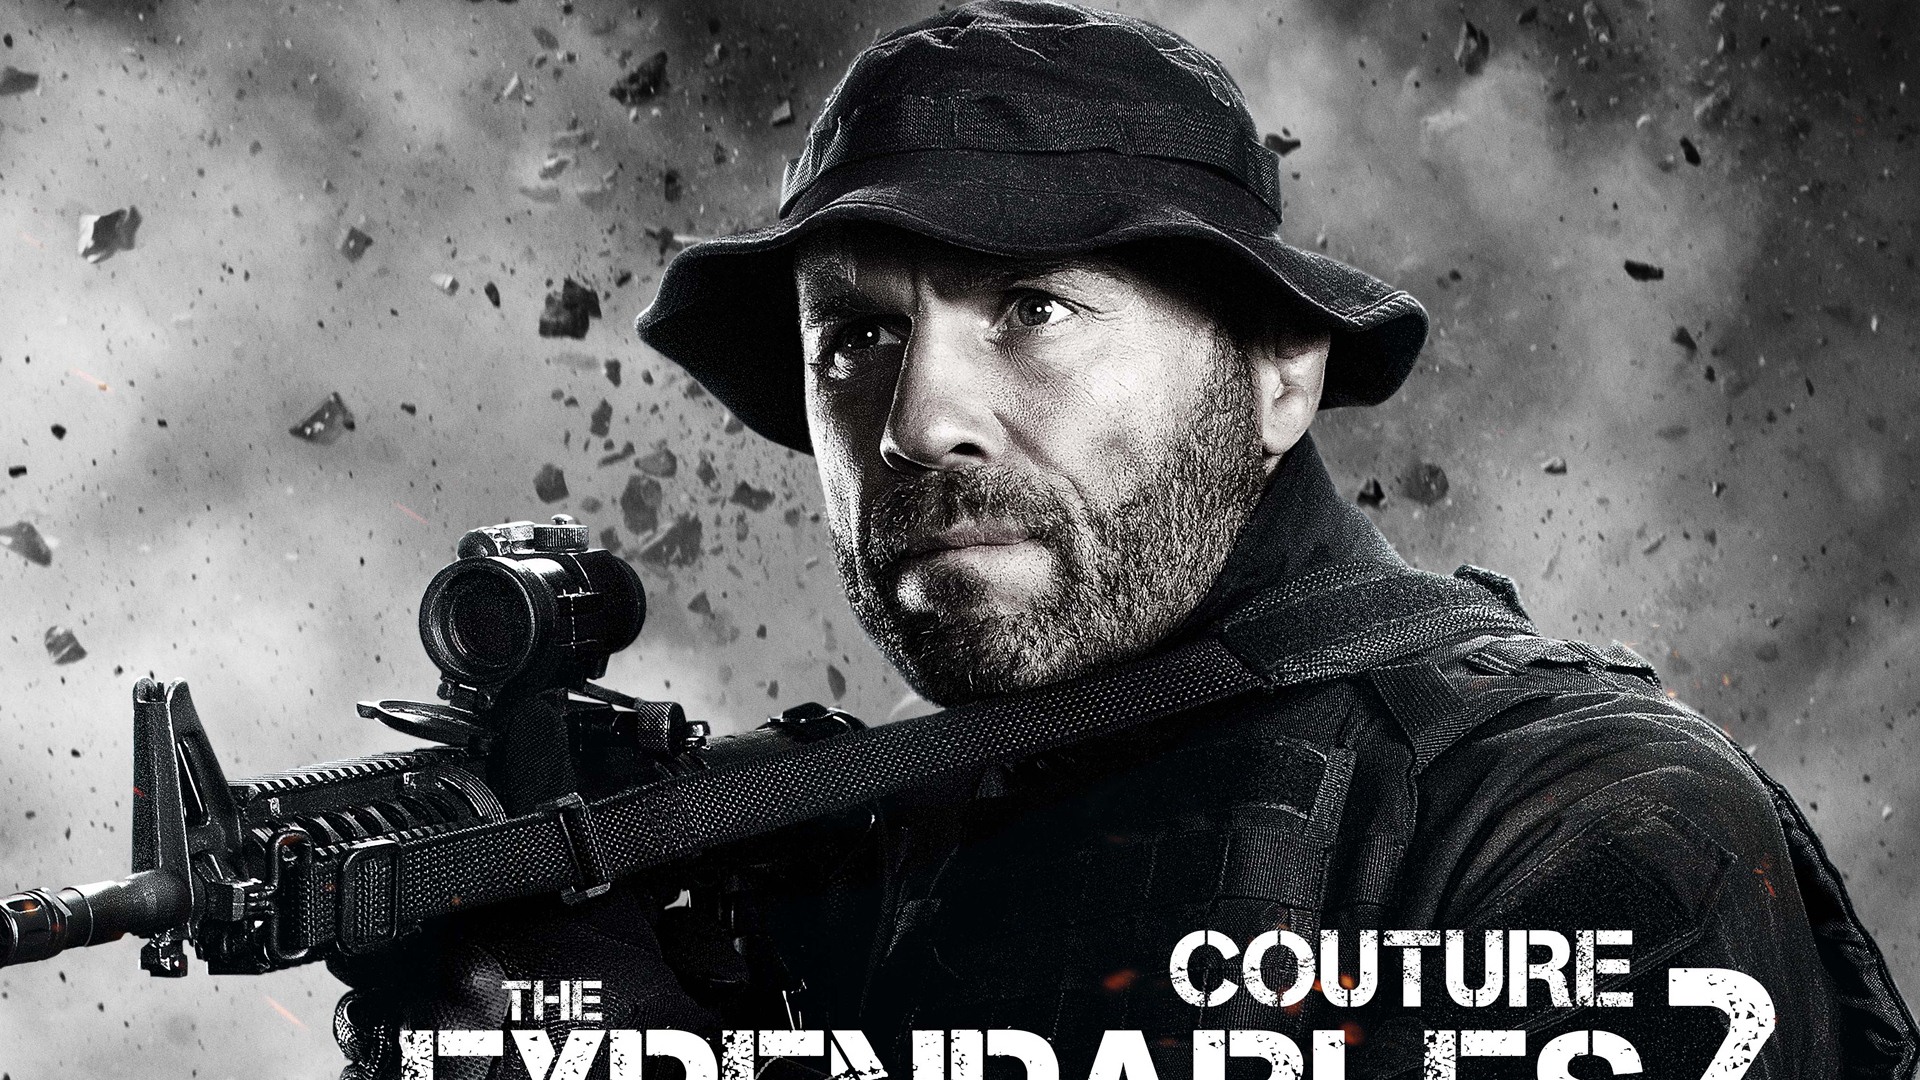 2012 The Expendables 2 敢死队2 高清壁纸8 - 1920x1080